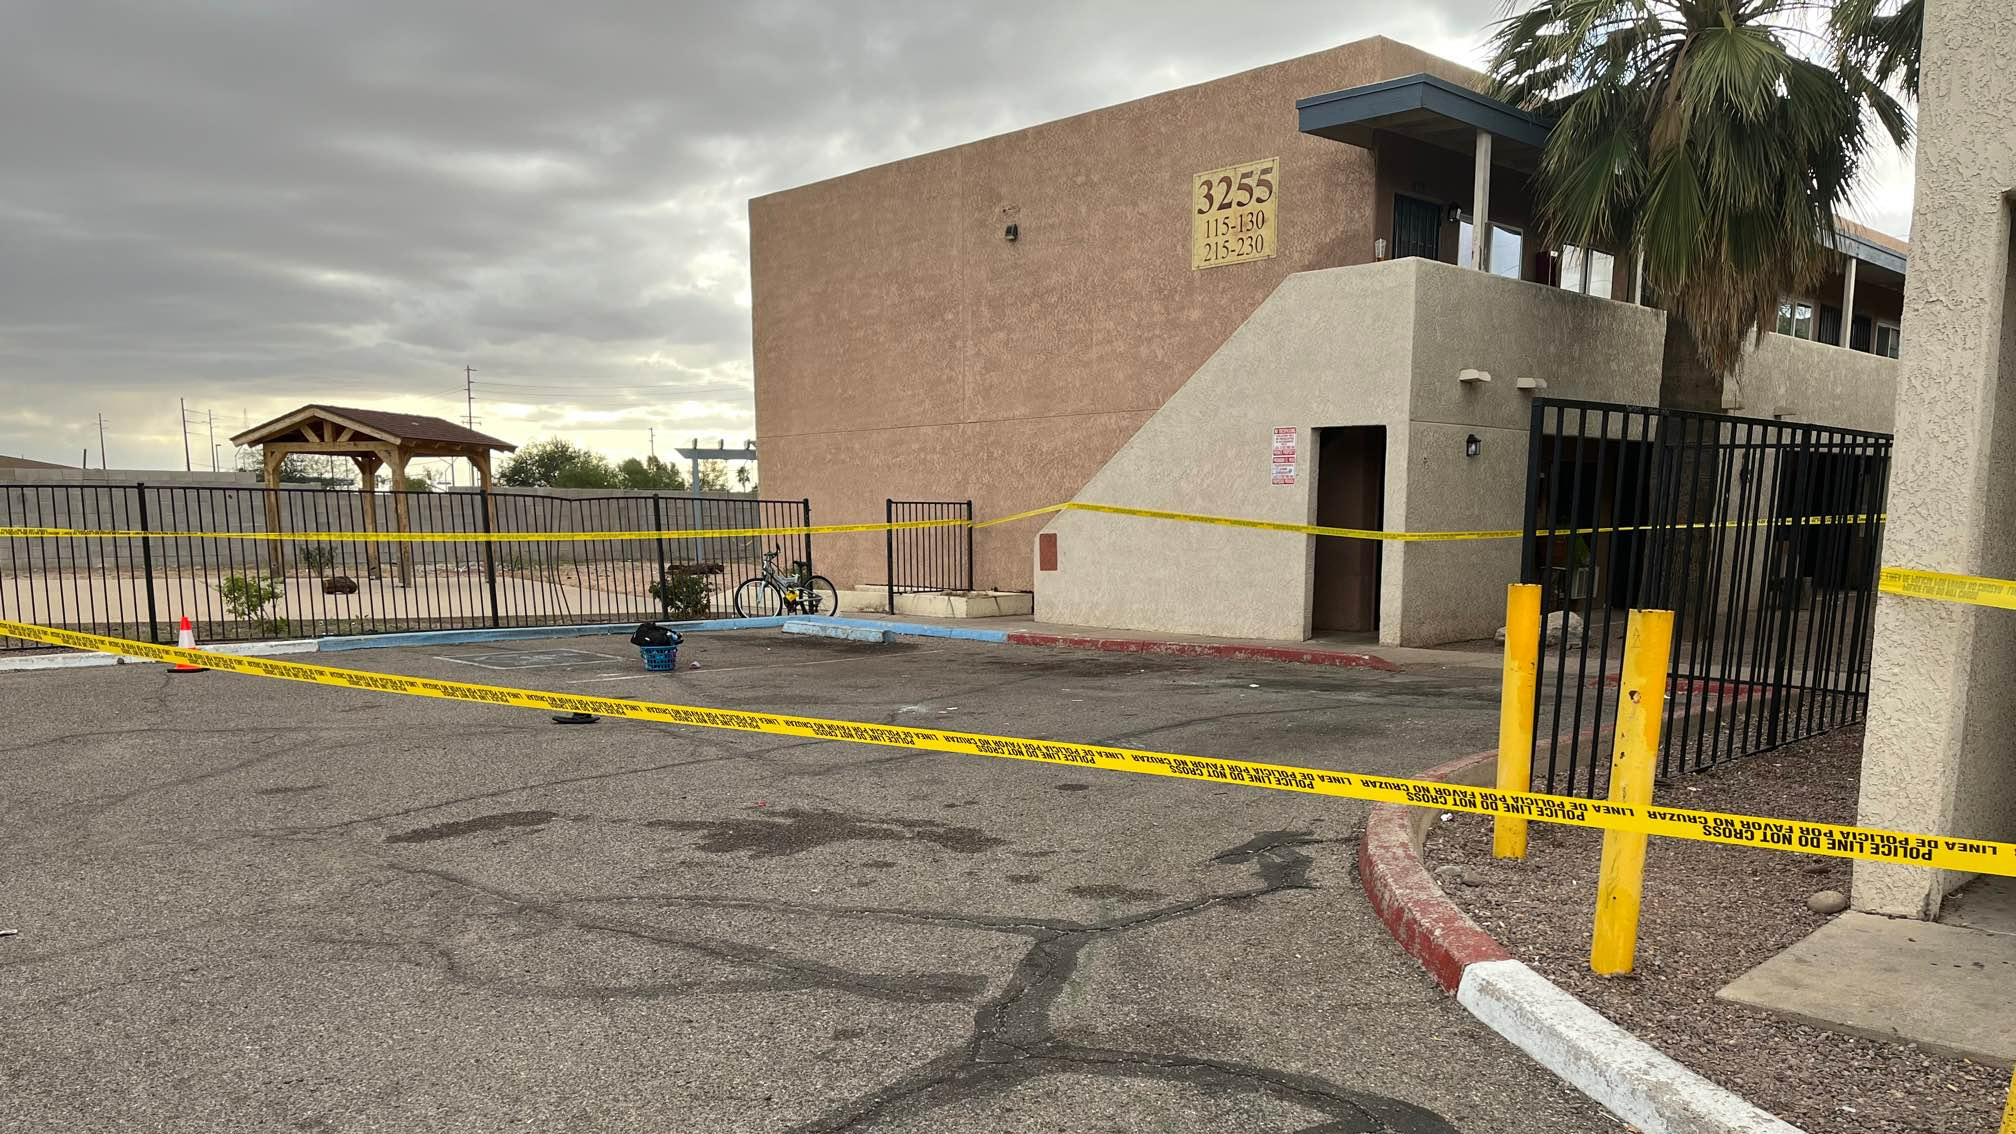 Man found shot at apartment complex on Tucson's east side